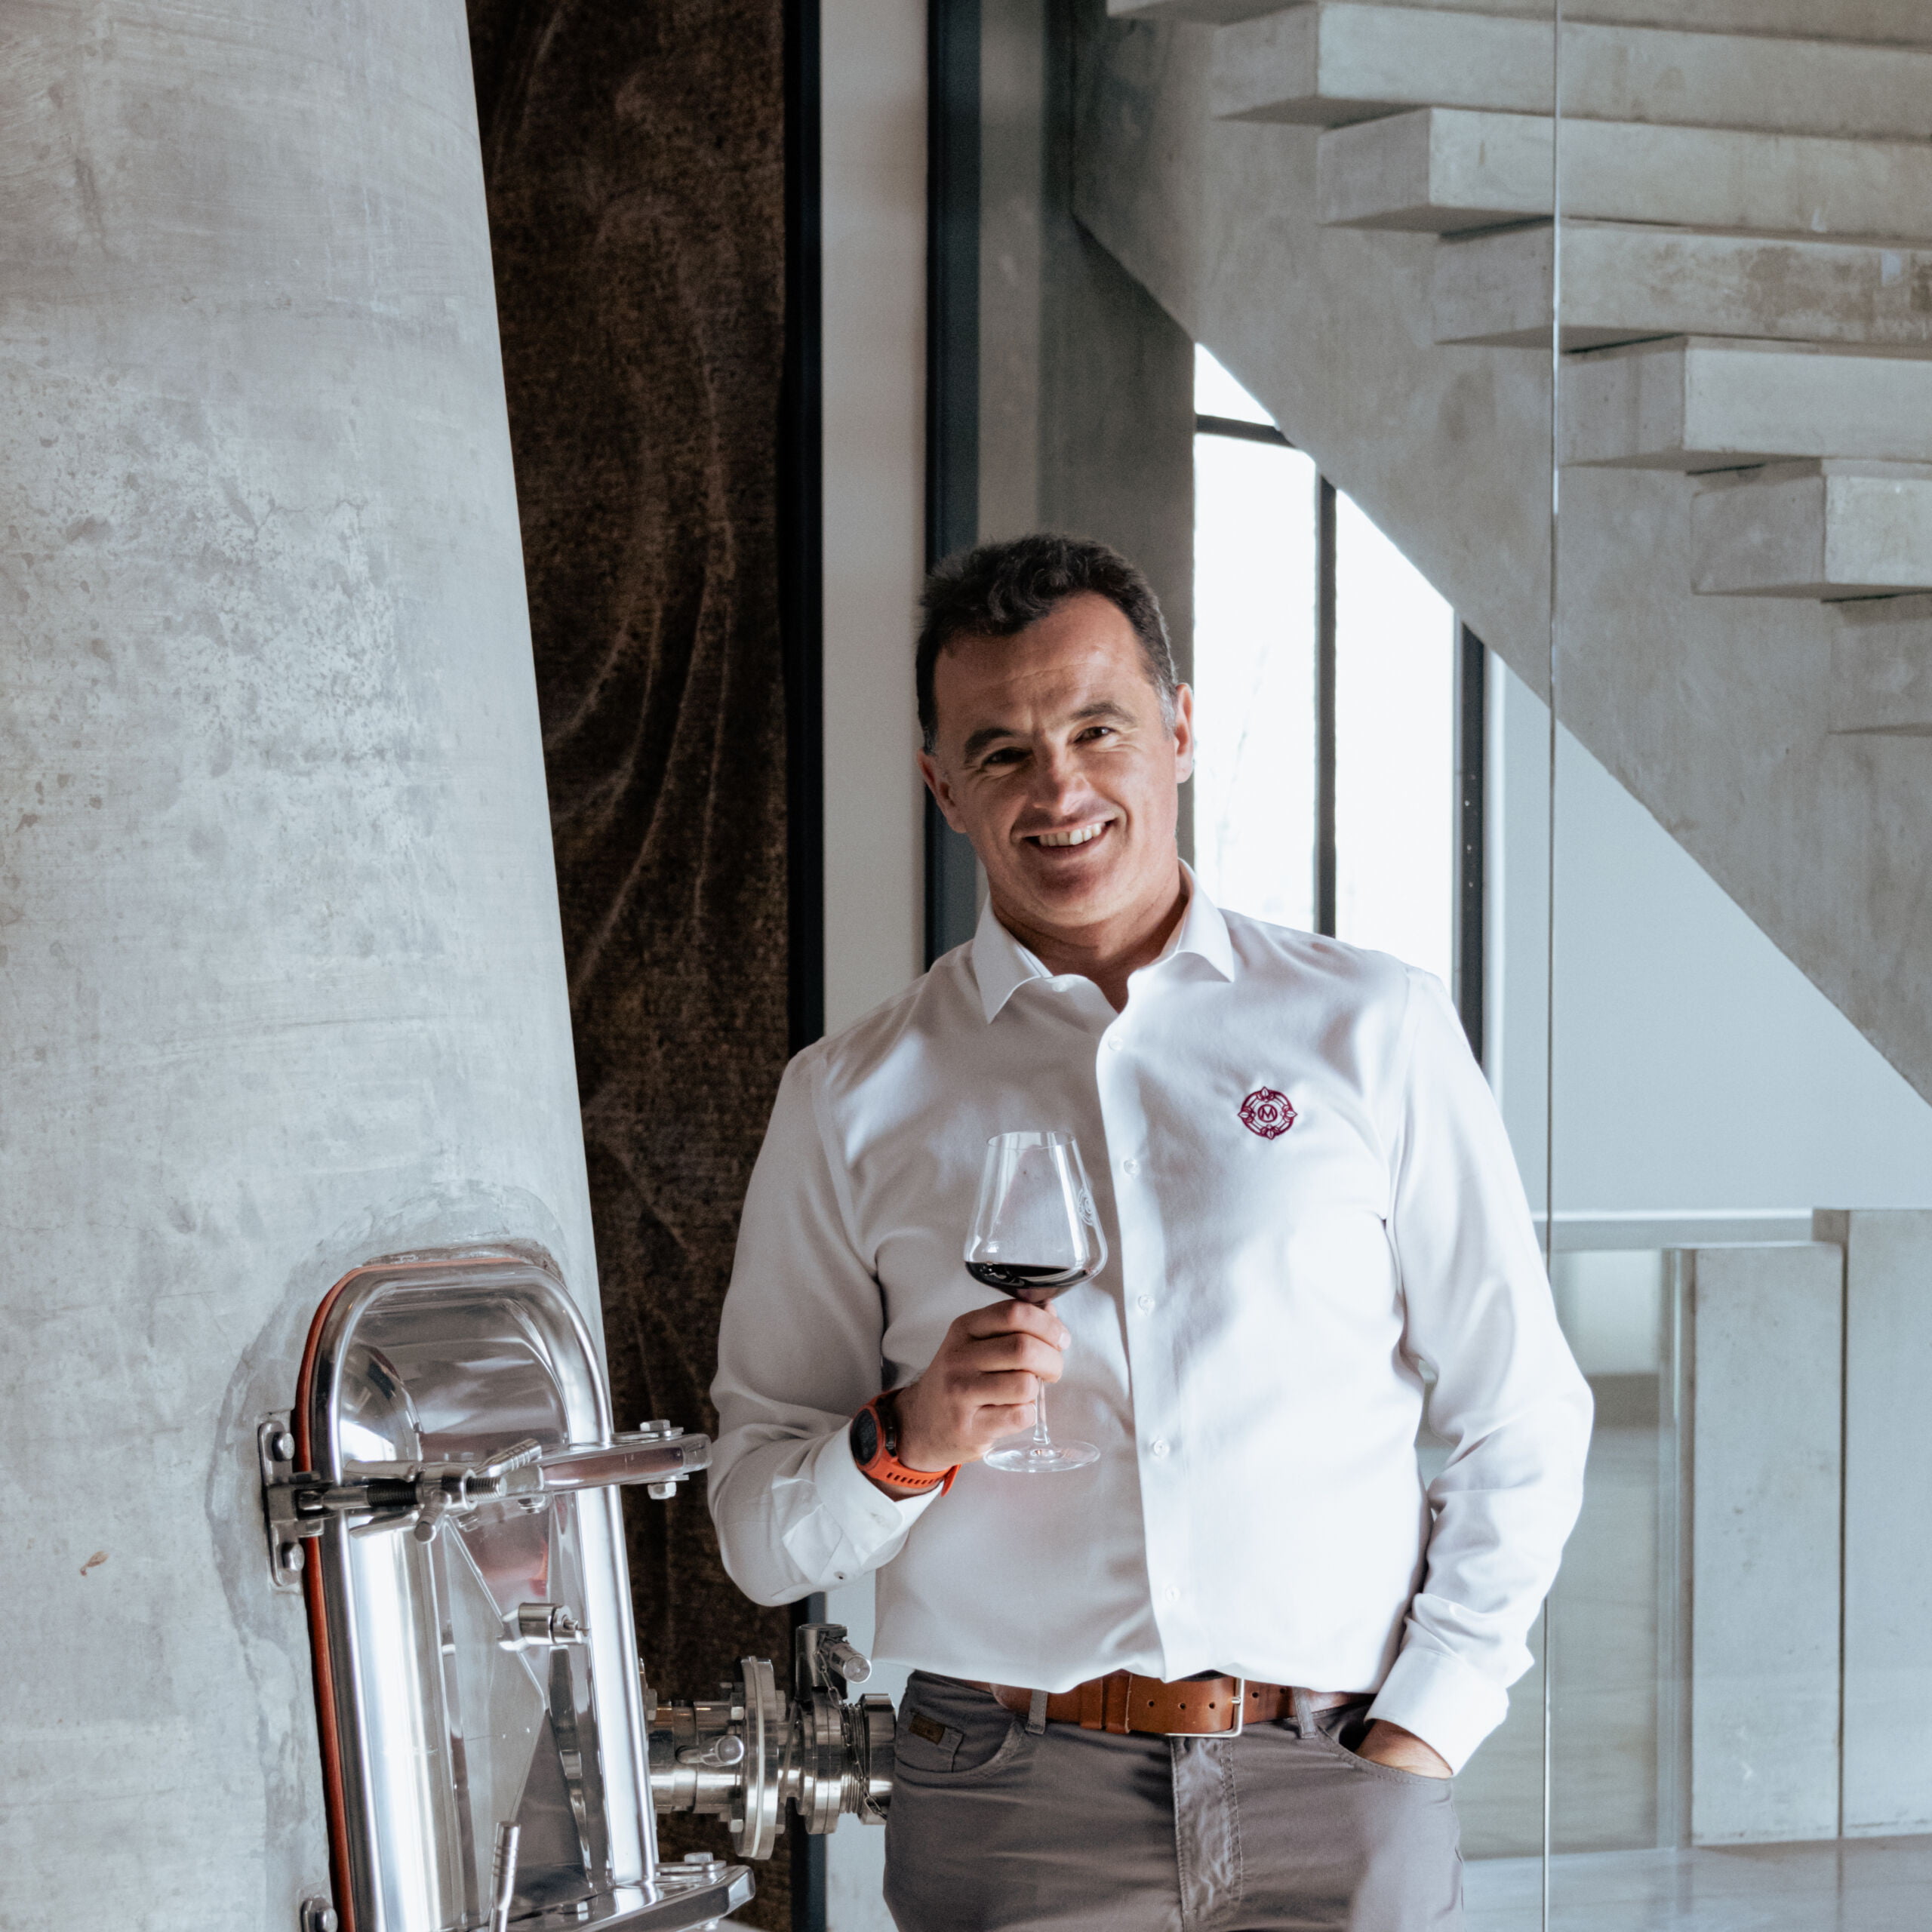 Meet the cellar Master at Chateau Montlabert